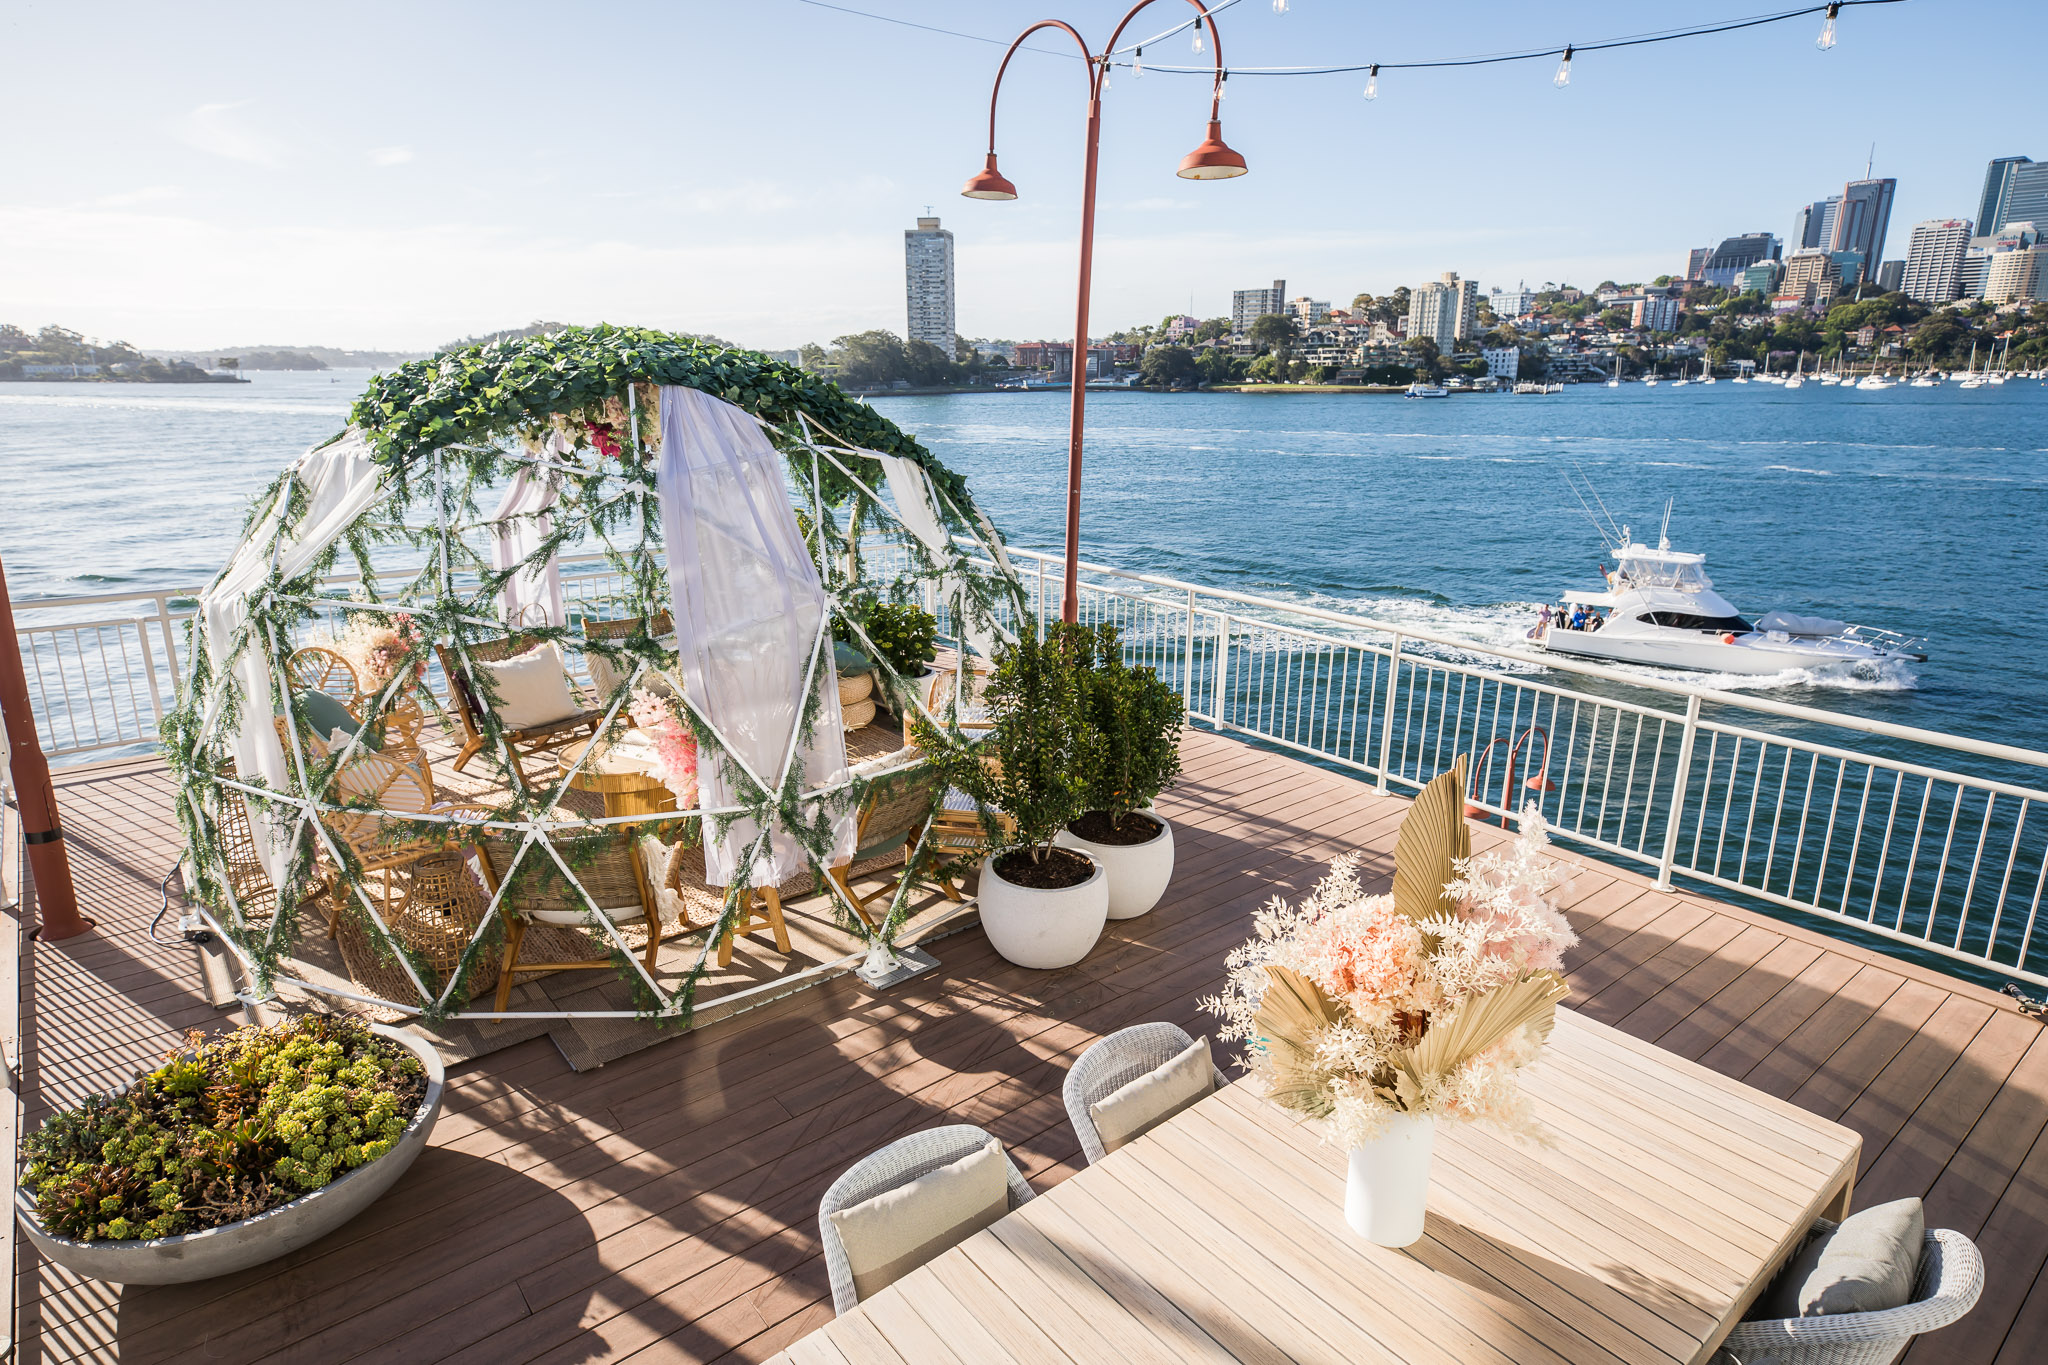 Pier One, Sydney launches glasshouses for outdoor dining - Eat Out 